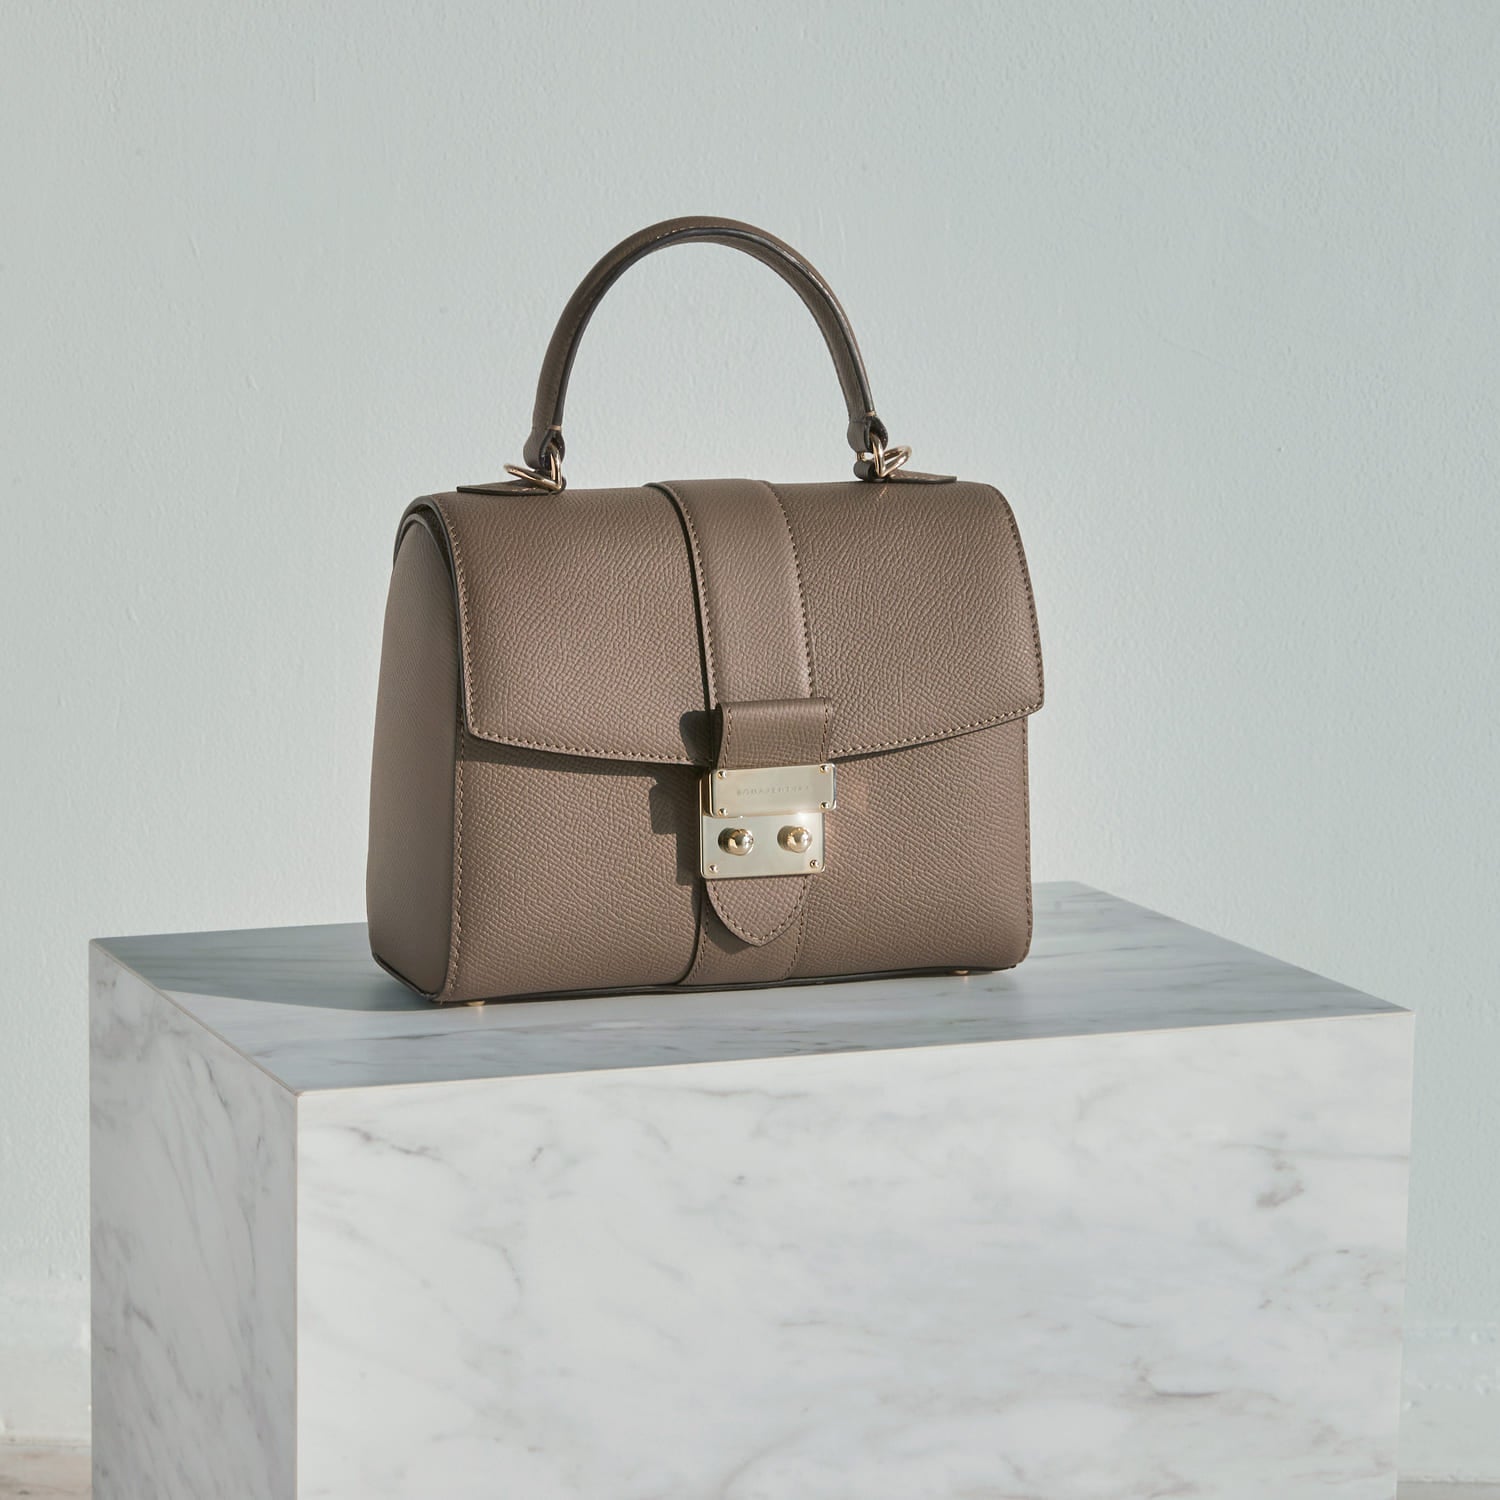 Ana bag in Noblesse leather